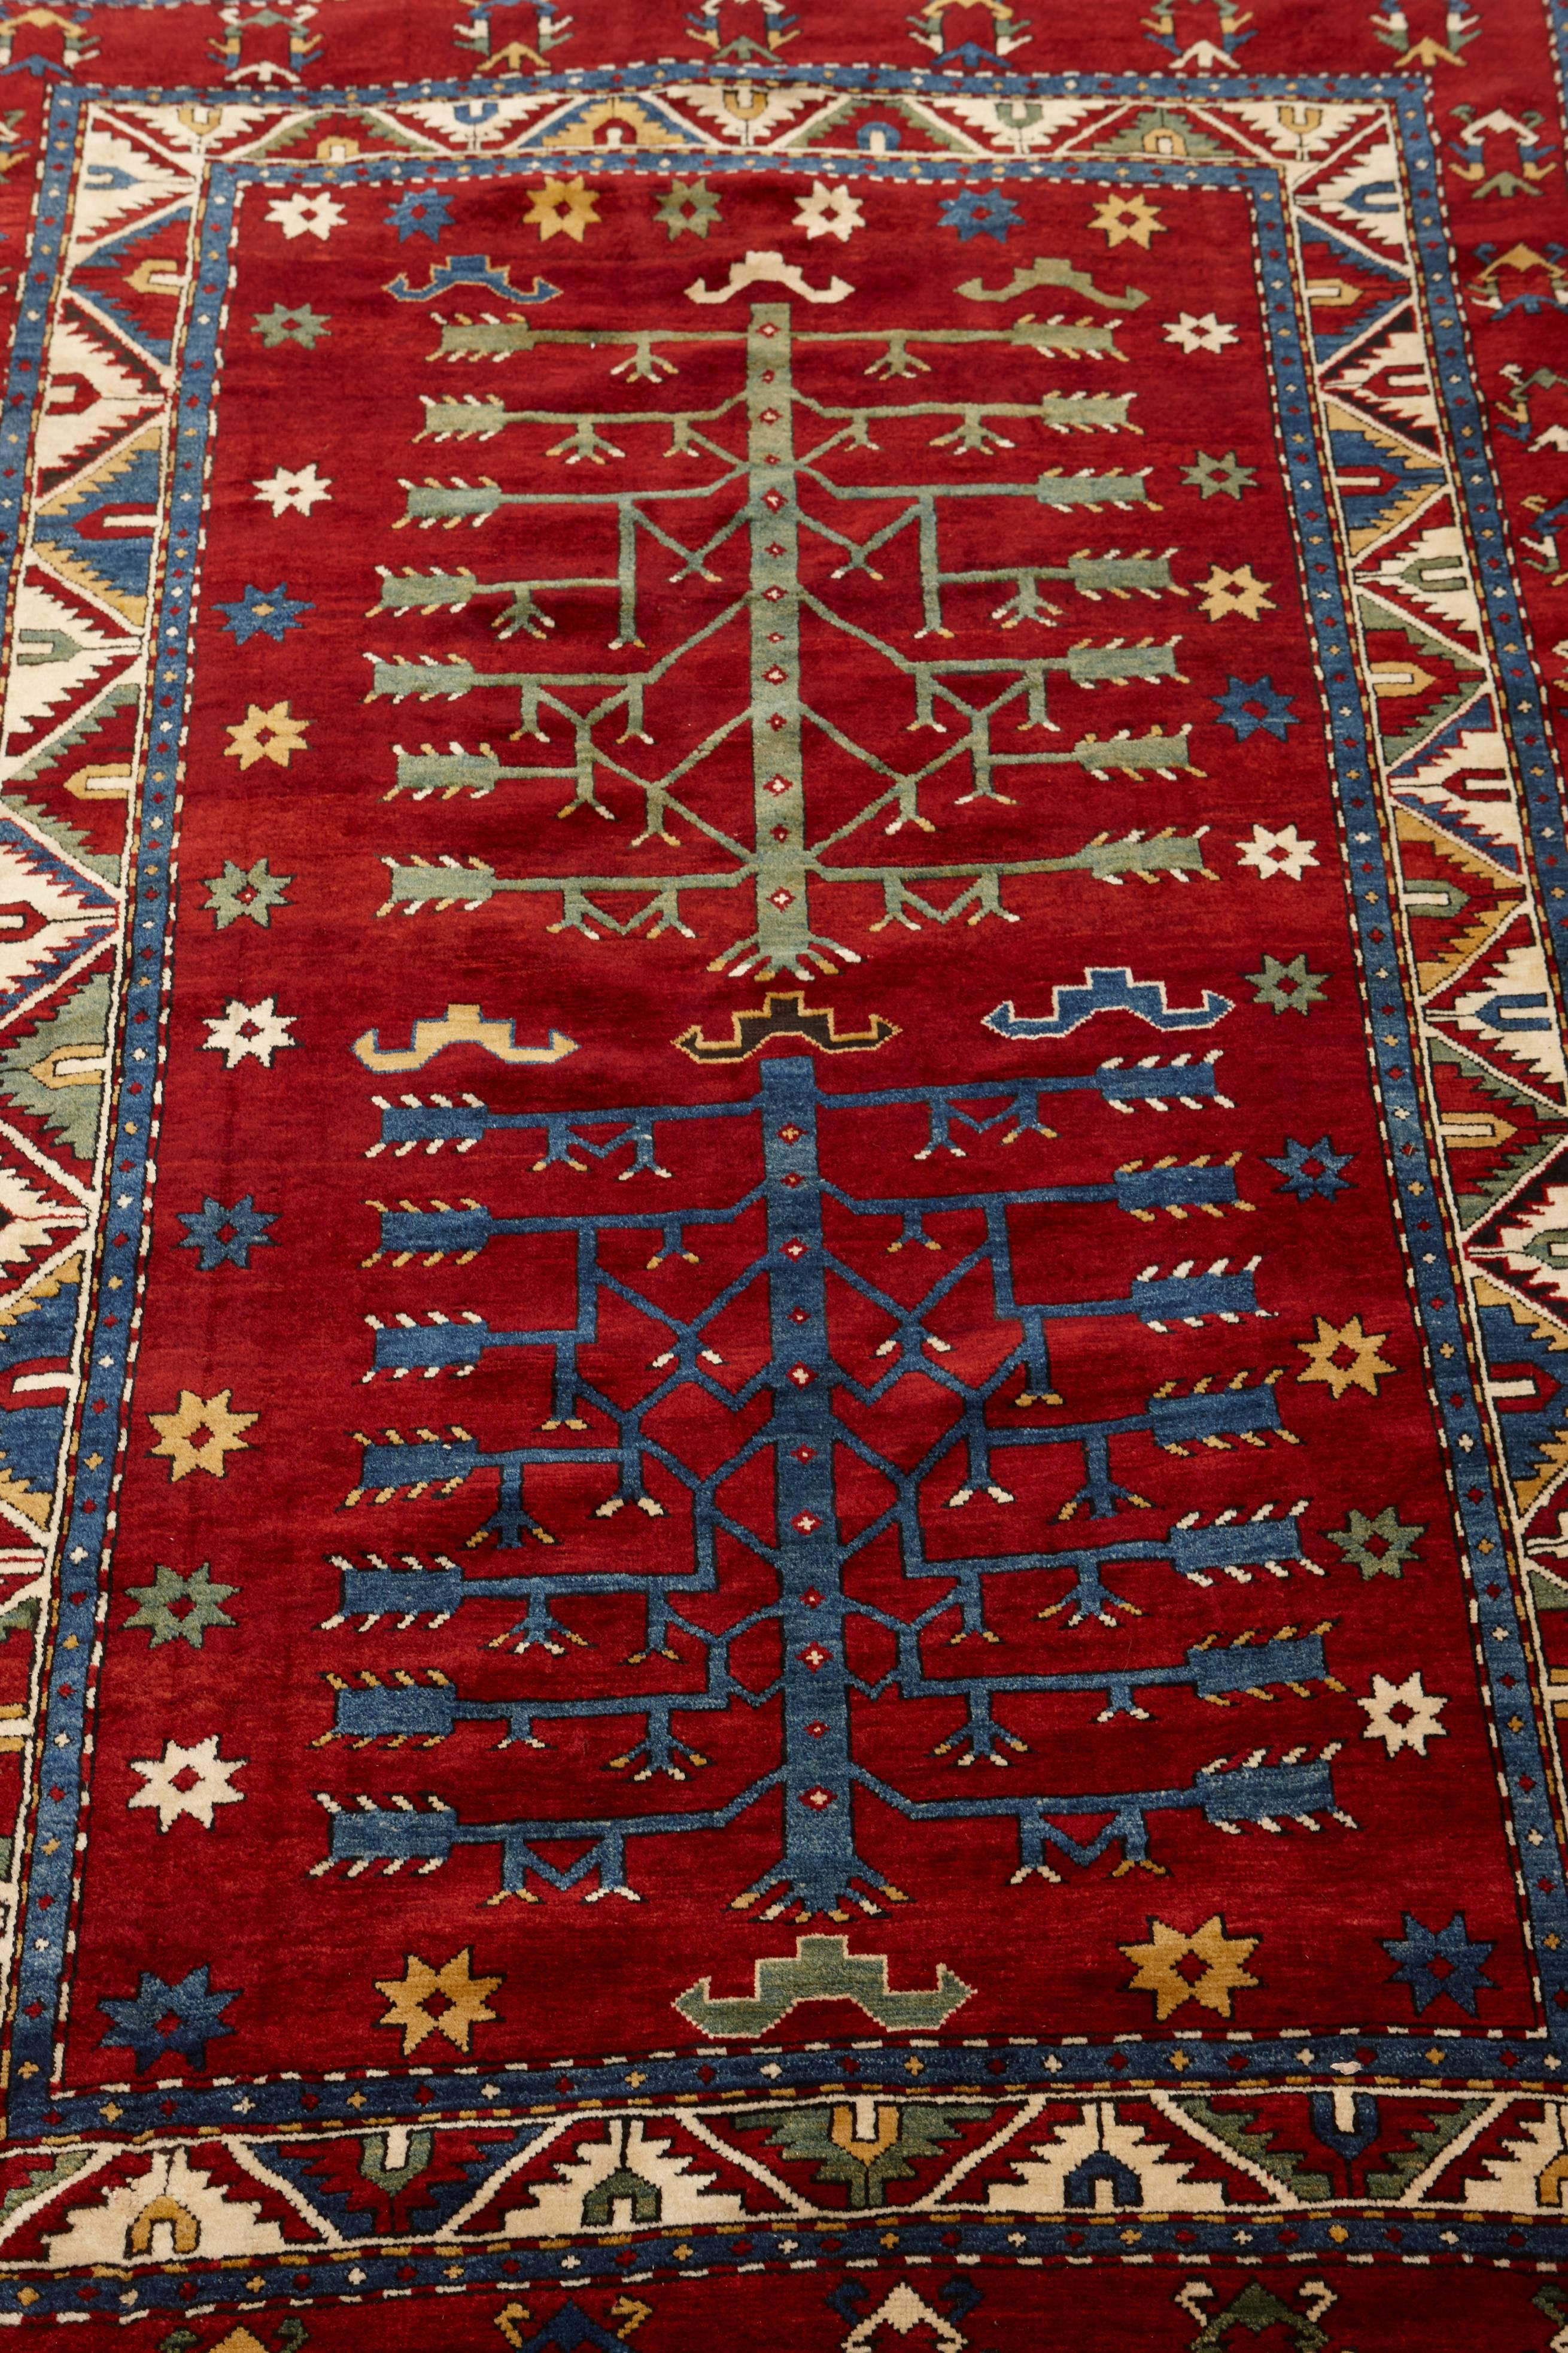 A highly prized large-sized antique Tree of Life Kazak carpet.

An ancient symbol in Urartu (the ancient proto-Armenian kingdom), the tree of life is often found in older Armenian rugs, drawn onto the exterior walls of fortresses, and carved onto